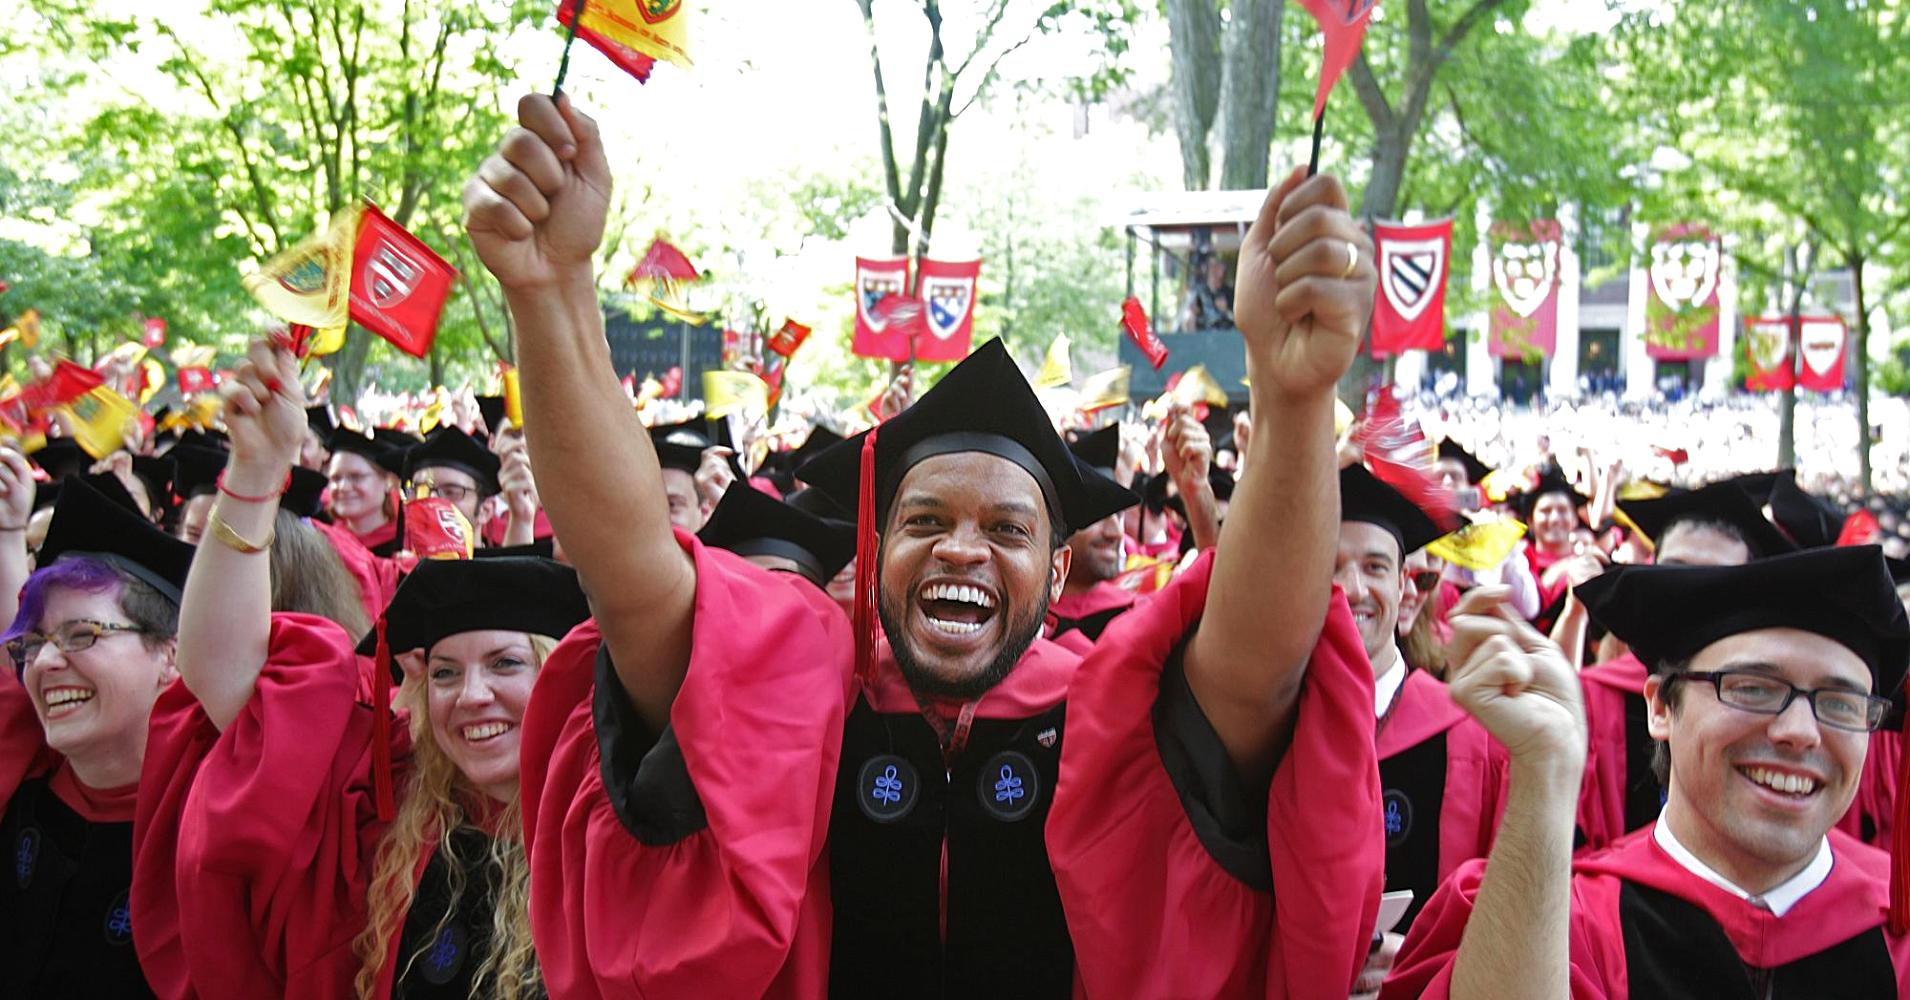 25 colleges that are worth the money